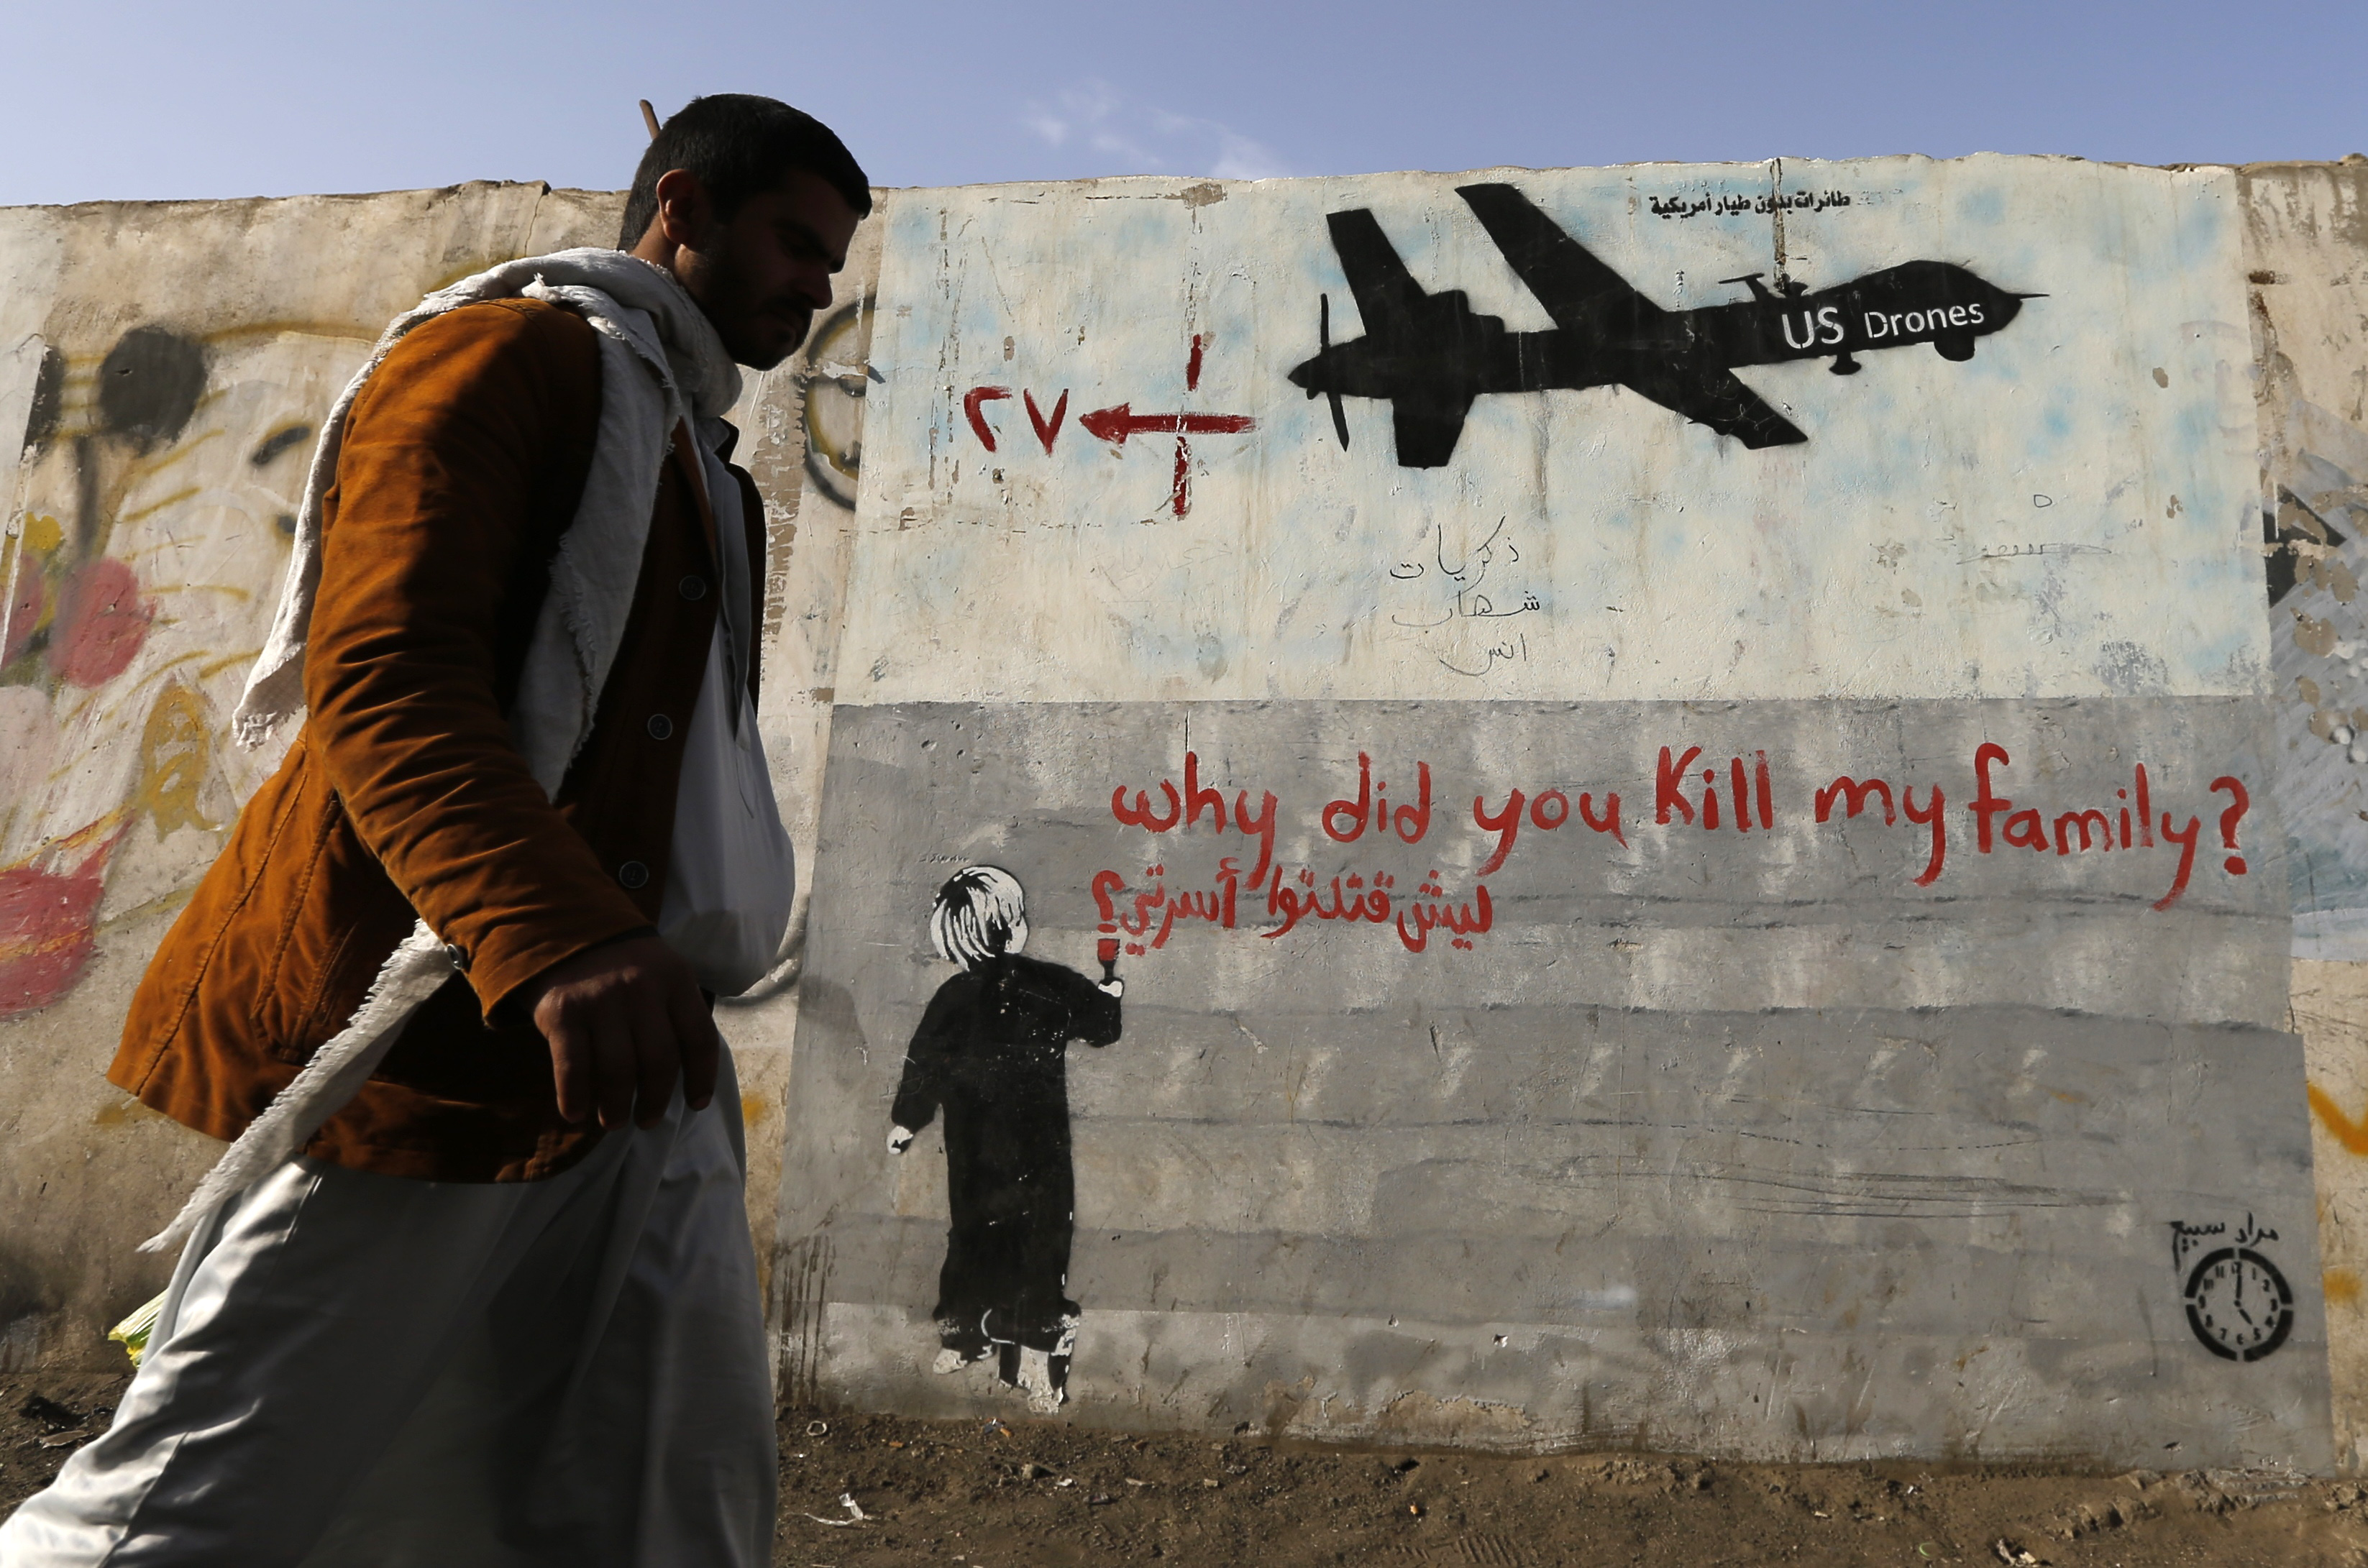 A man walks past a graffiti, denouncing strikes by U.S. drones in Yemen, painted on a wall in Sanaa November 13, 2014. Yemeni authorities have paid out tens of thousands of dollars to victims of drone strikes using U.S.-supplied funds, a source close to Yemen's presidency said, echoing accounts by legal sources and a family that lost two members in a 2012 raid. REUTERS/Khaled Abdullah (YEMEN - Tags: CIVIL UNREST MILITARY POLITICS SOCIETY TPX IMAGES OF THE DAY) - RTR4E1VF